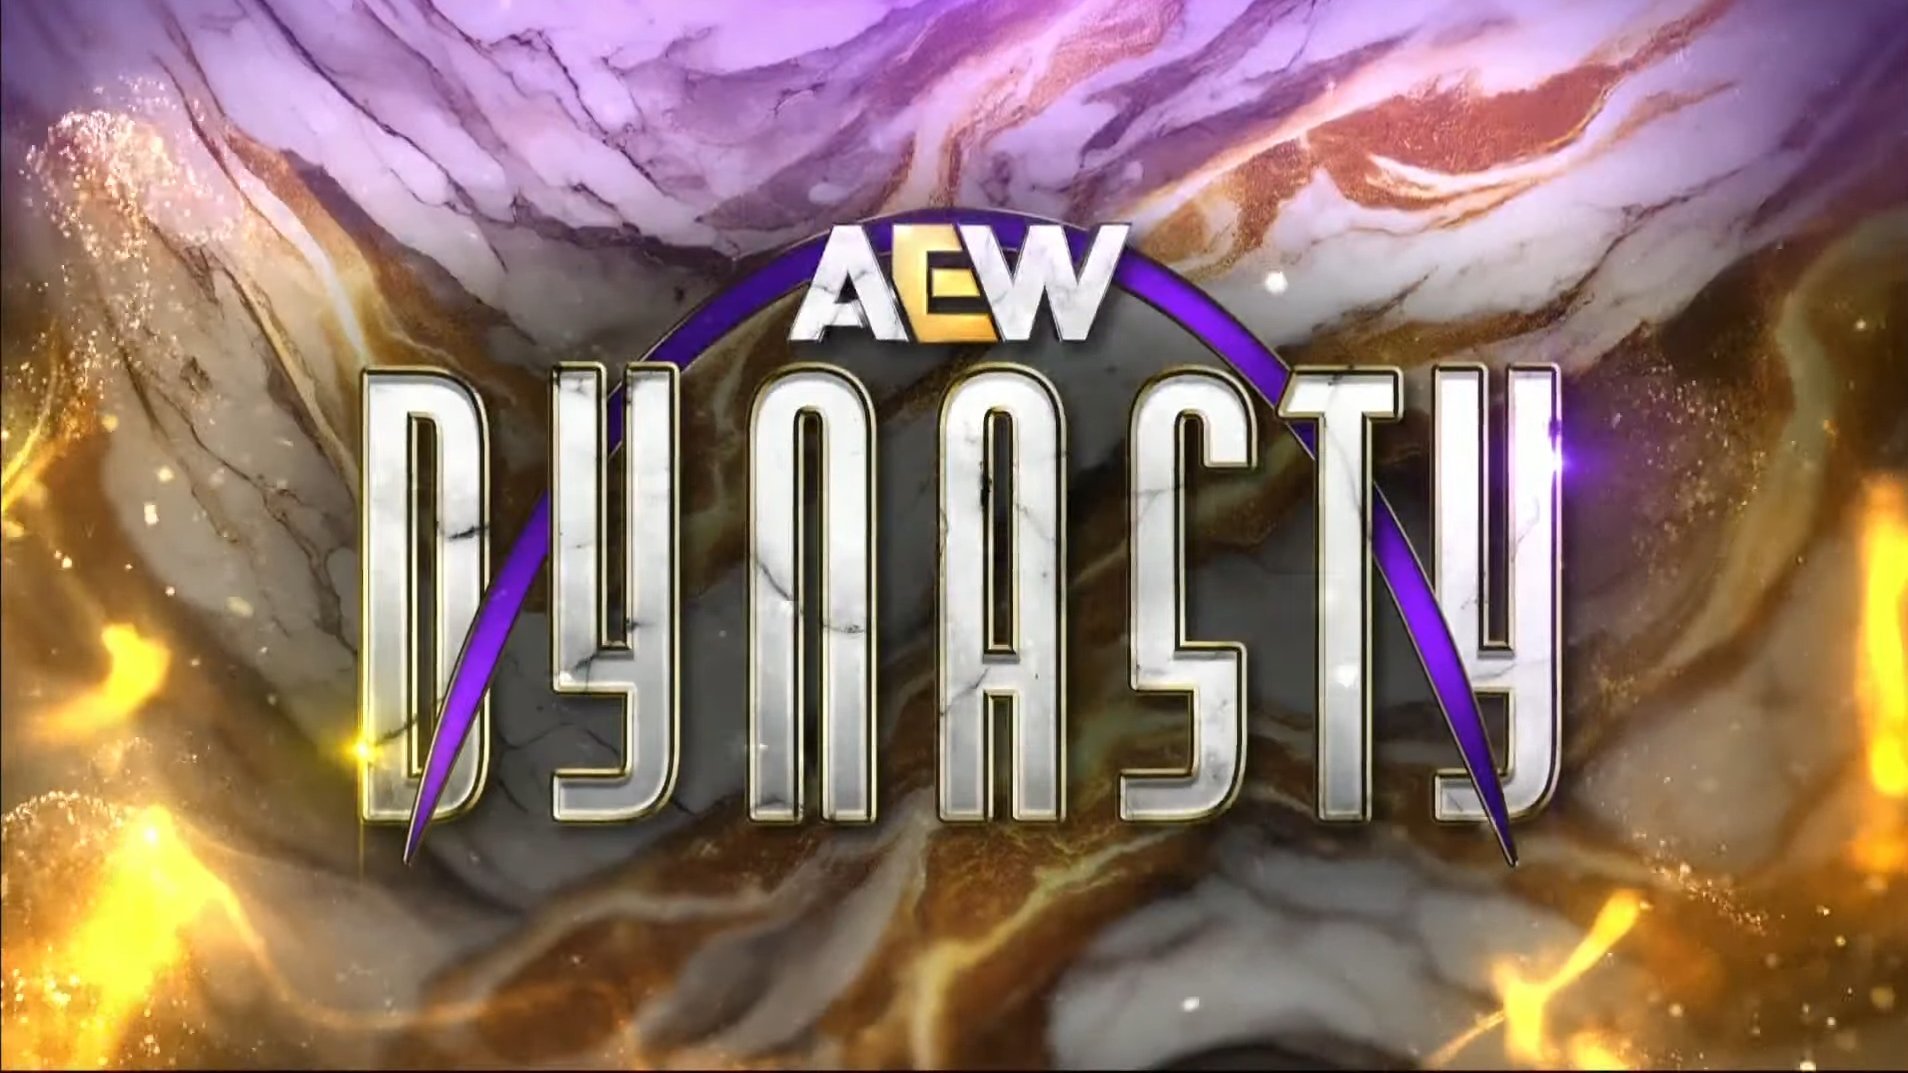 “After AEW Dynasty Concludes: Unveiling the Post-Show Developments”